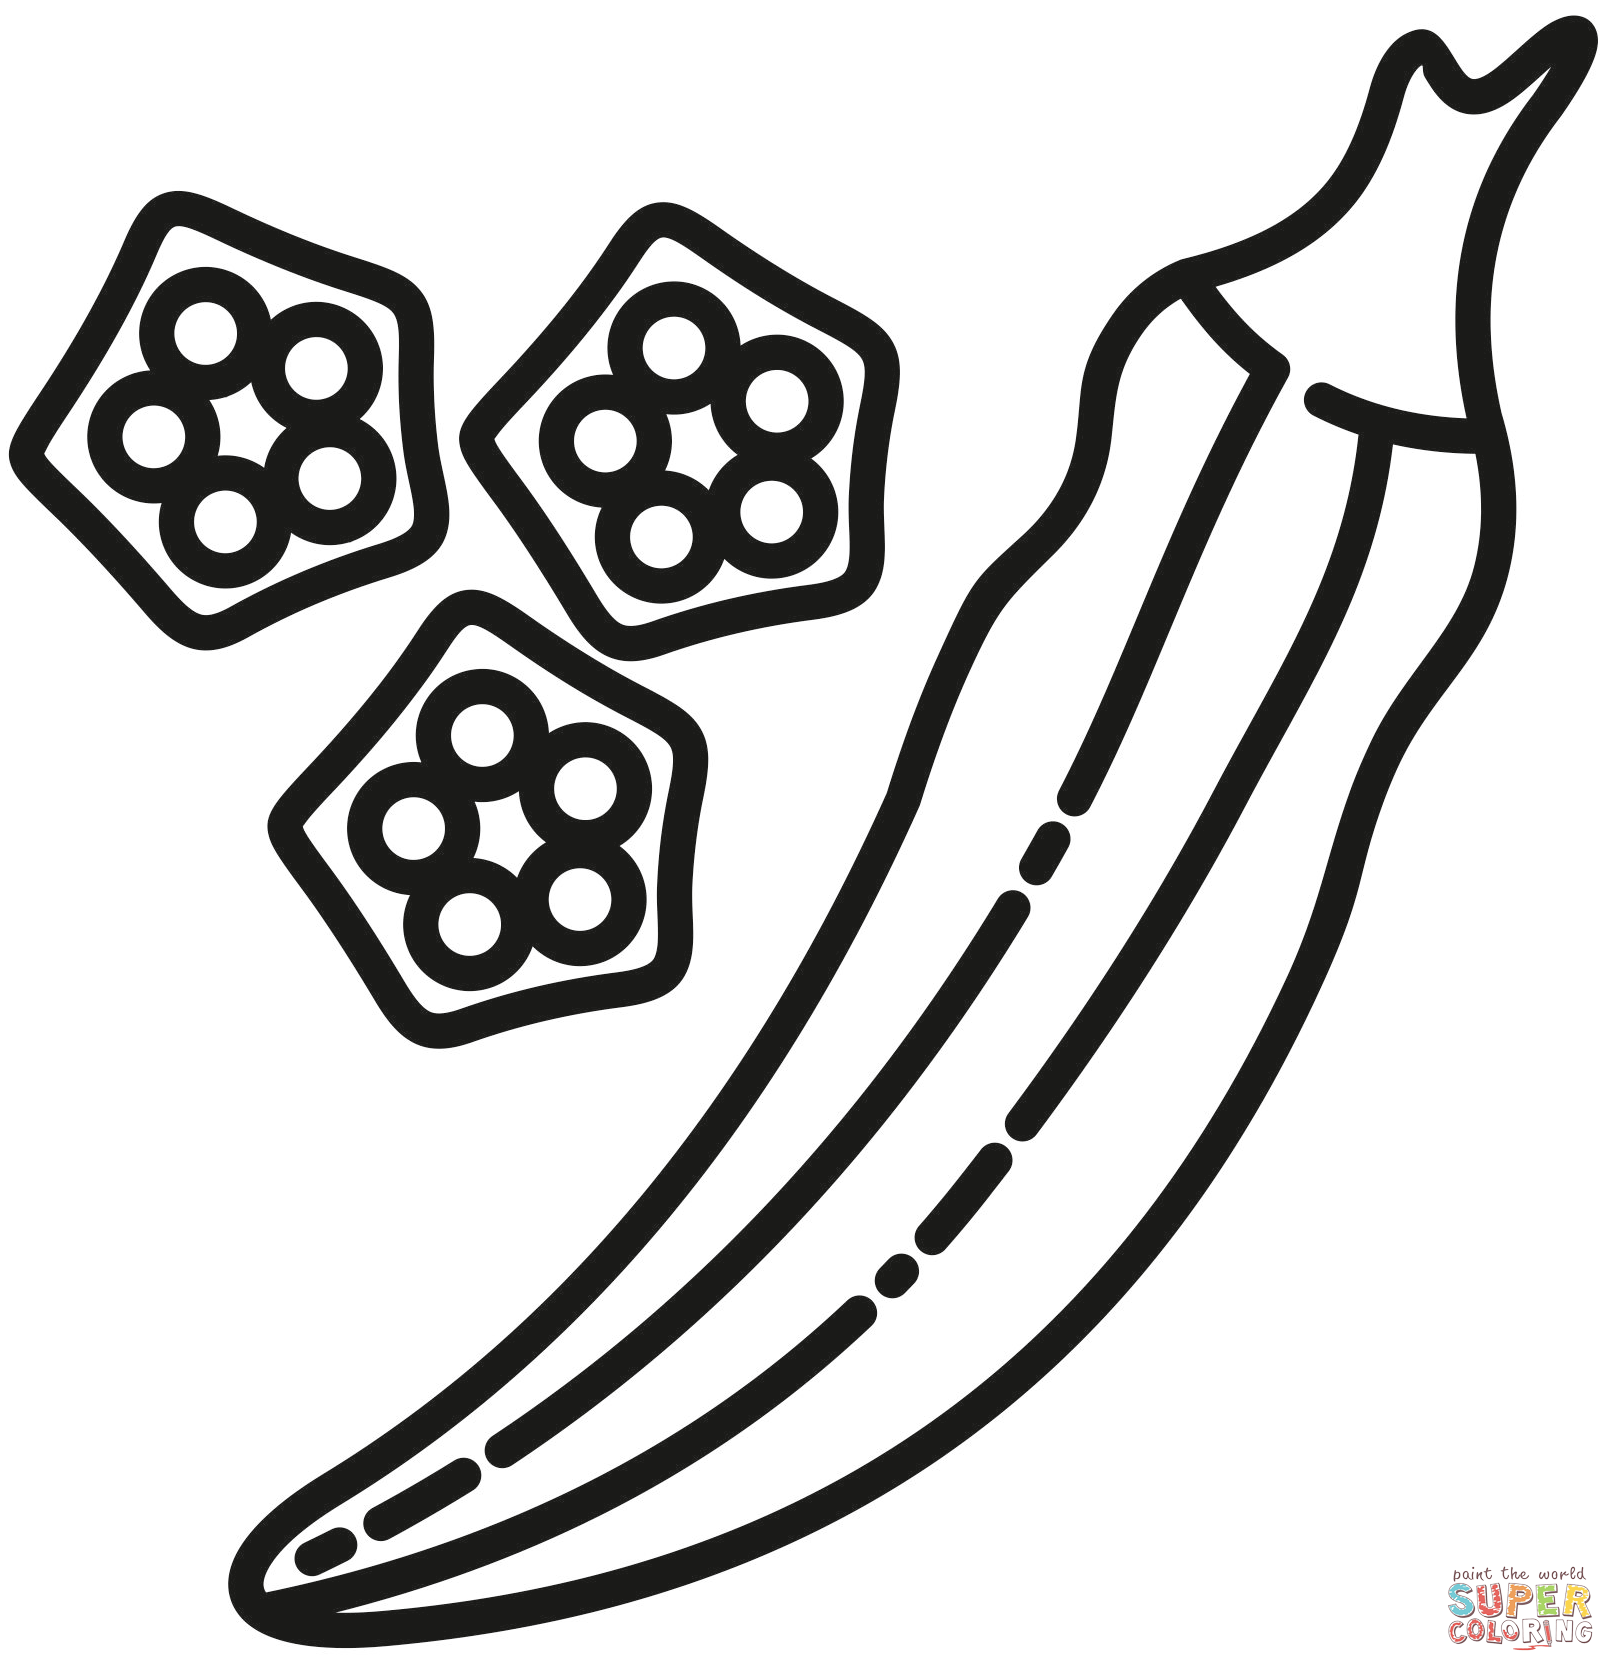 Okra coloring page | Free Printable Coloring Pages